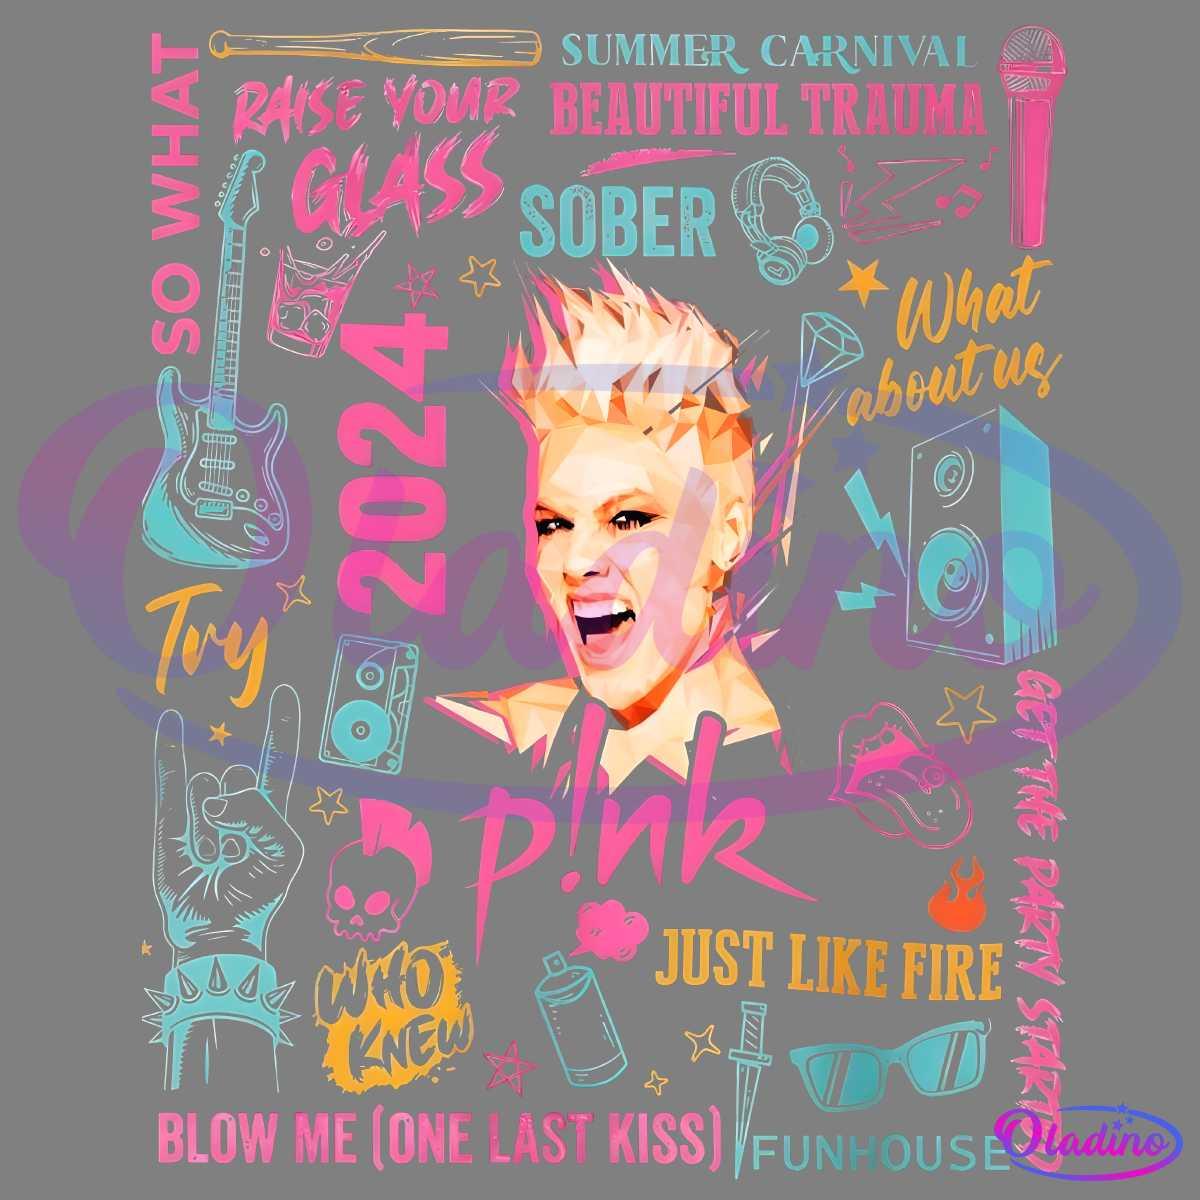 A vibrant graphic featuring a person with spiky hair in the center. Surrounding them are colorful text and illustrations including phrases like "Raise Your Glass," "Sober," "Just Like Fire," and "Blow Me (One Last Kiss)." Among these are drawings of guitars, a speaker, and more.